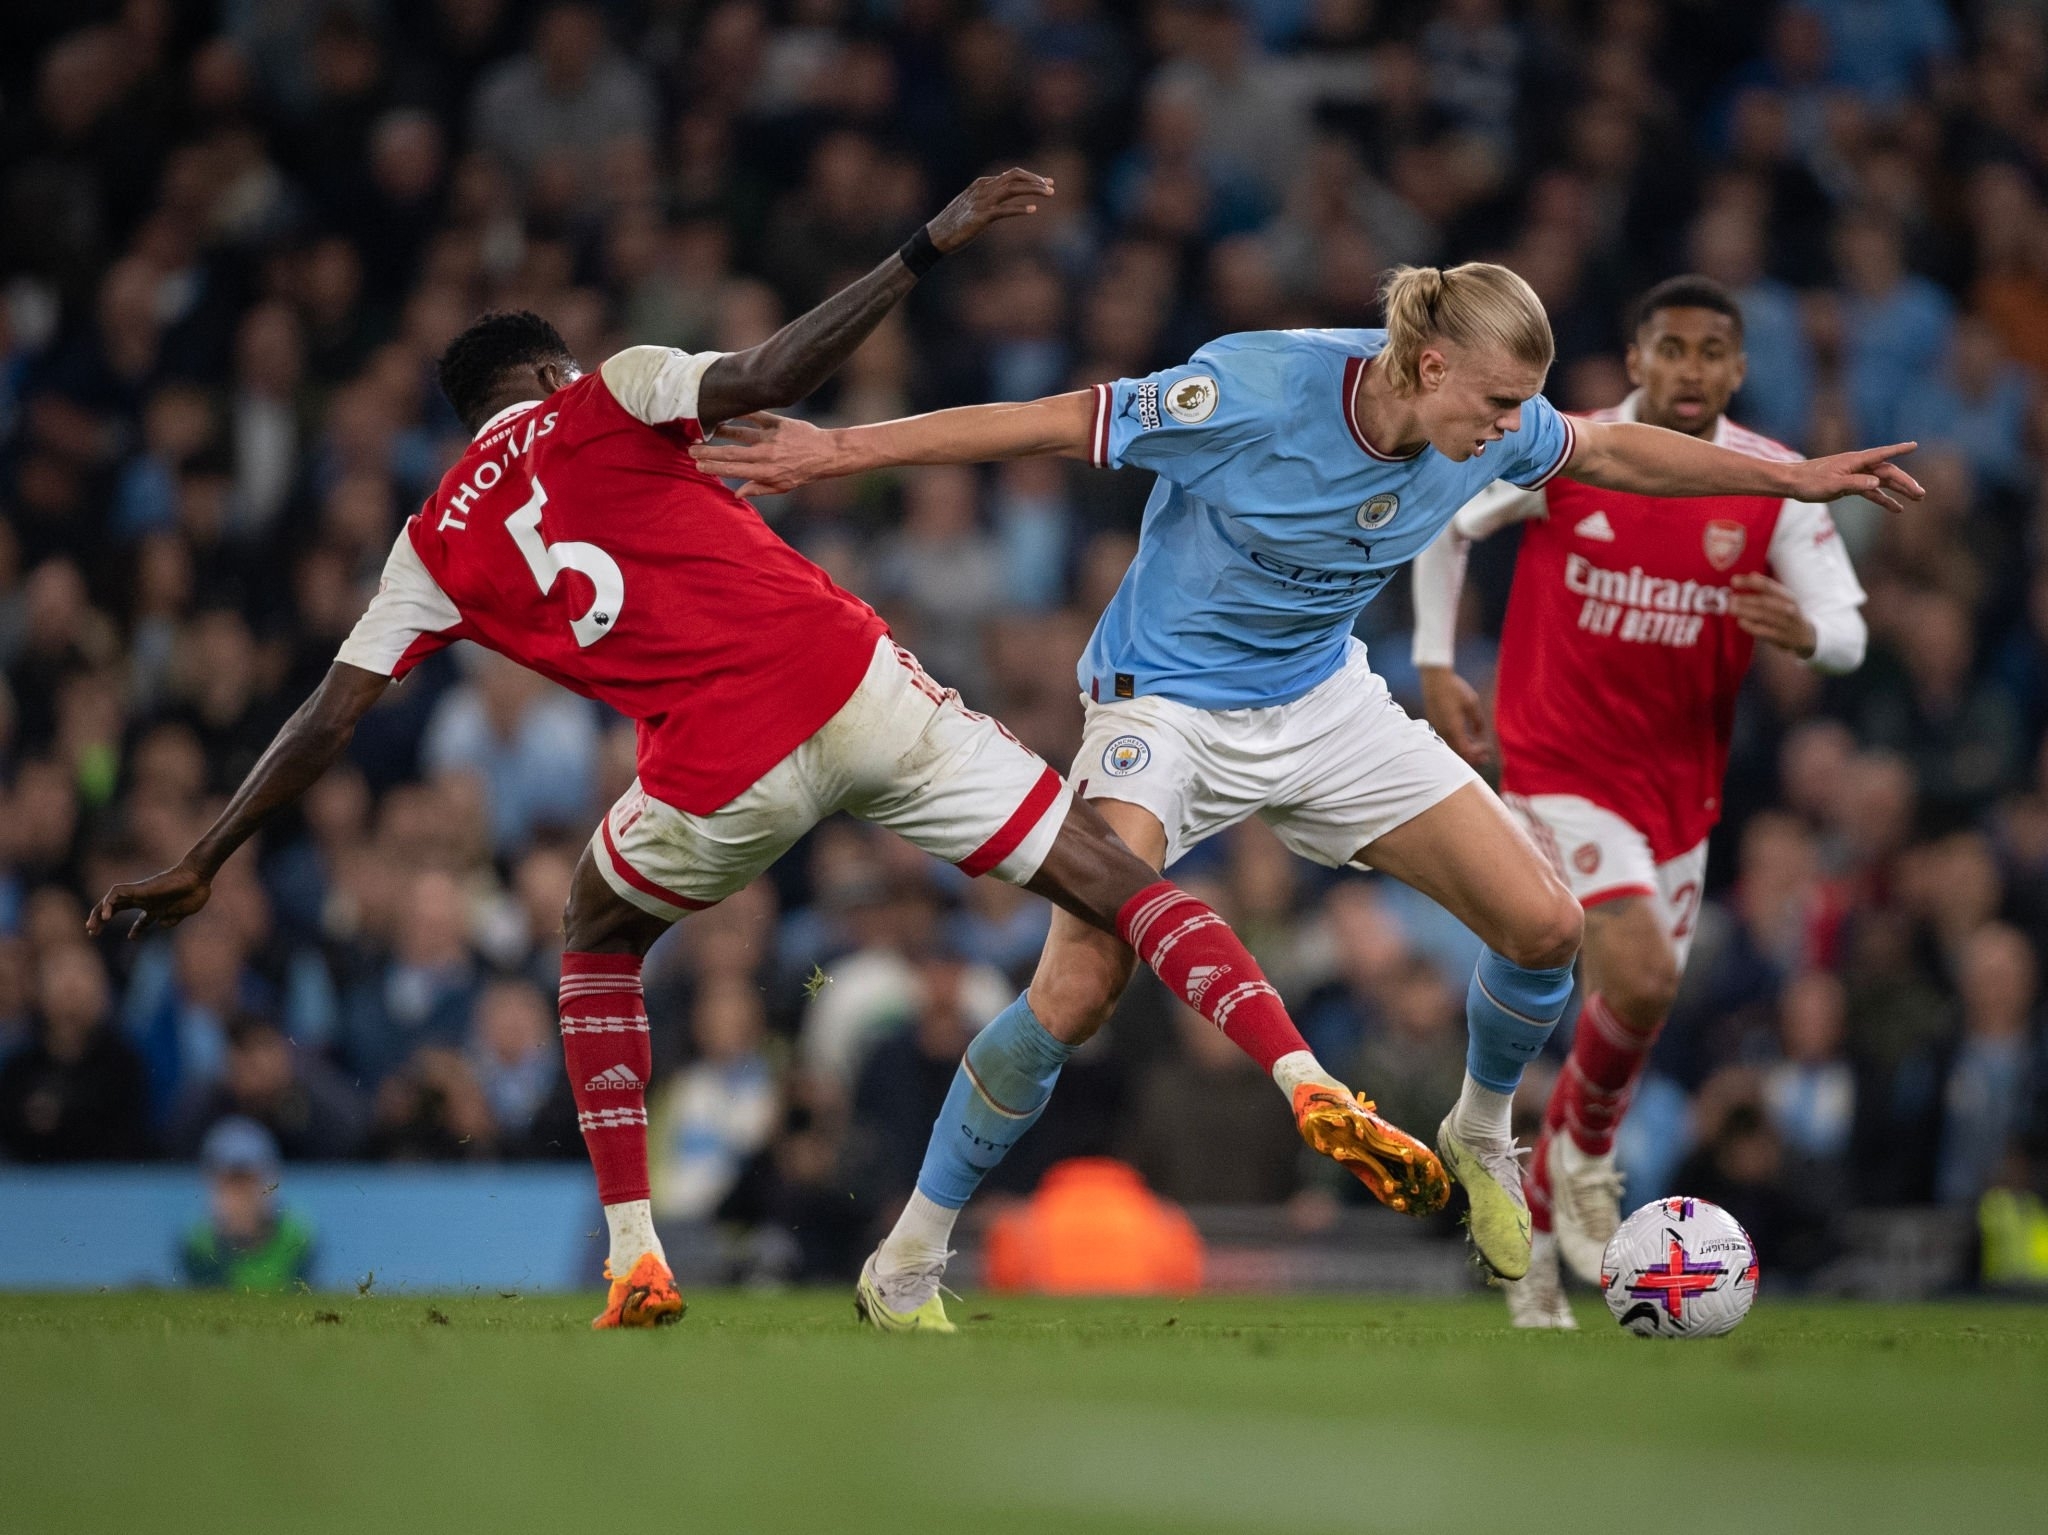 Fulham vs Man City LIVE Streaming FUL vs MCI LIVE in Premier League at 630 PM